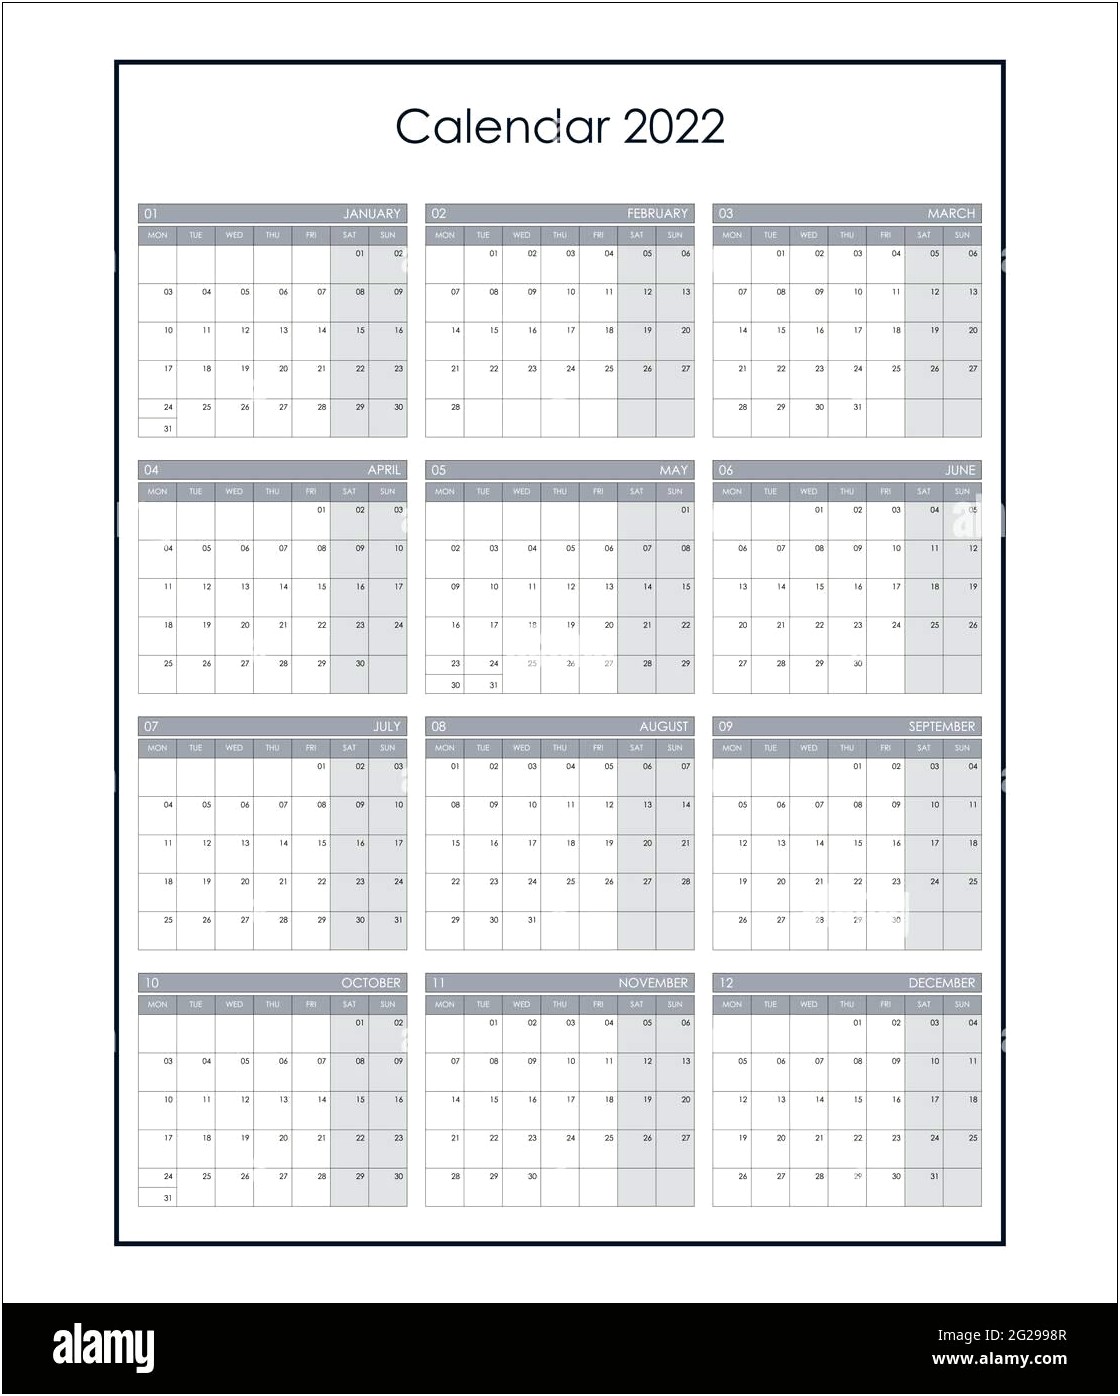 Calendar Templates Free Starting With Monday